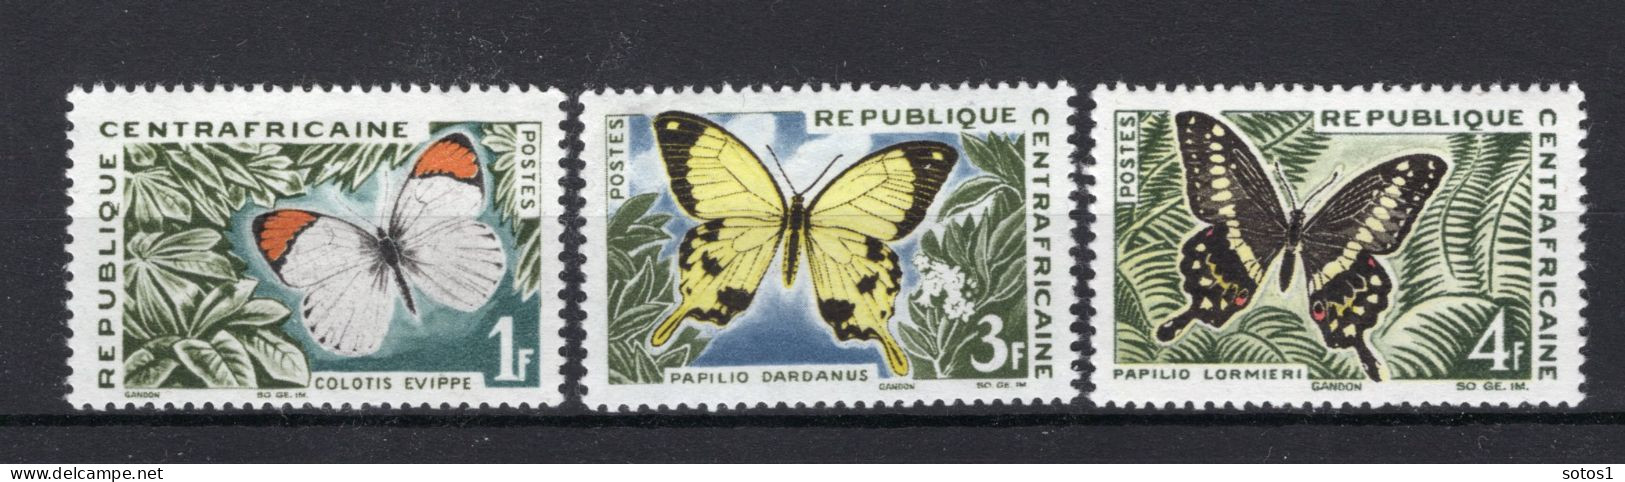 CENTRAFRICAINE Yt. 31/33 MNH 1963 - Repubblica Centroafricana